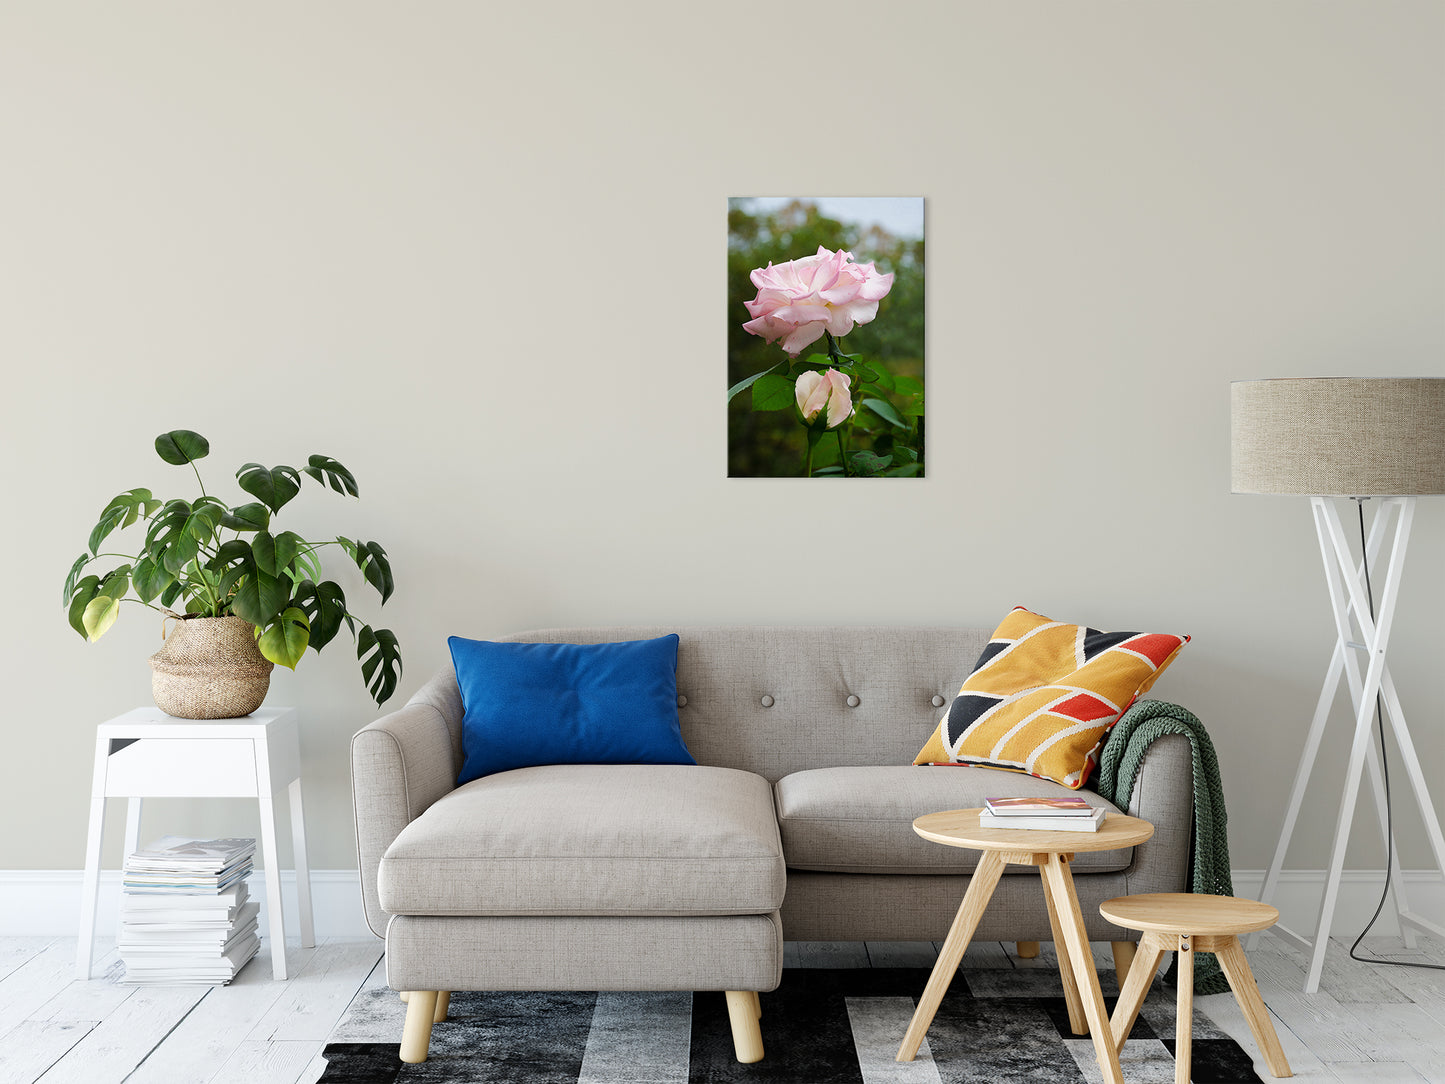 Floral Canvas: Admiration Nature / Floral Photo Fine Art Canvas Wall Art Prints 20" x 24" - PIPAFINEART